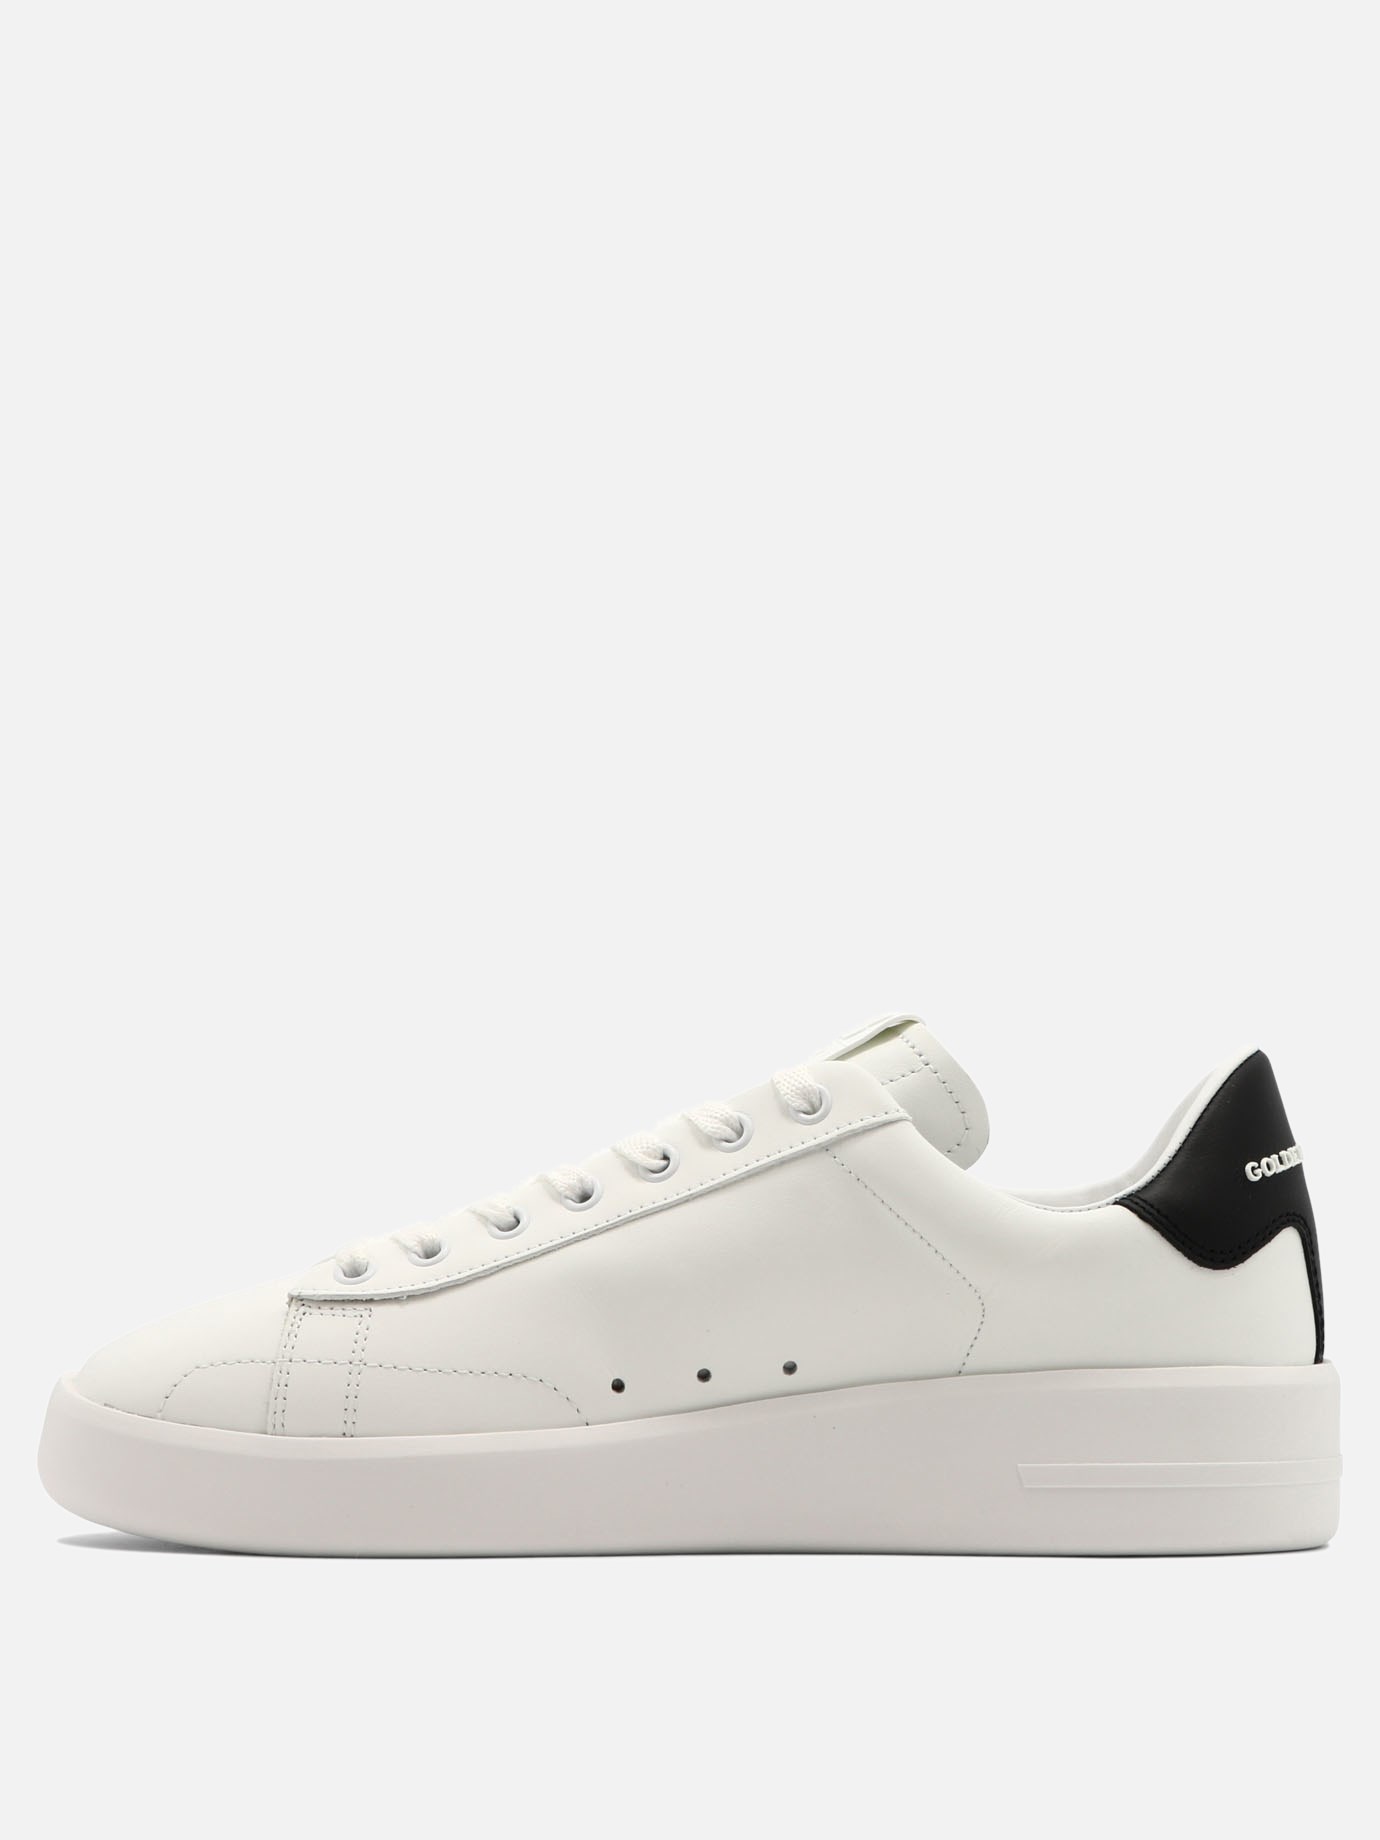  Pure New  sneakers by Golden Goose